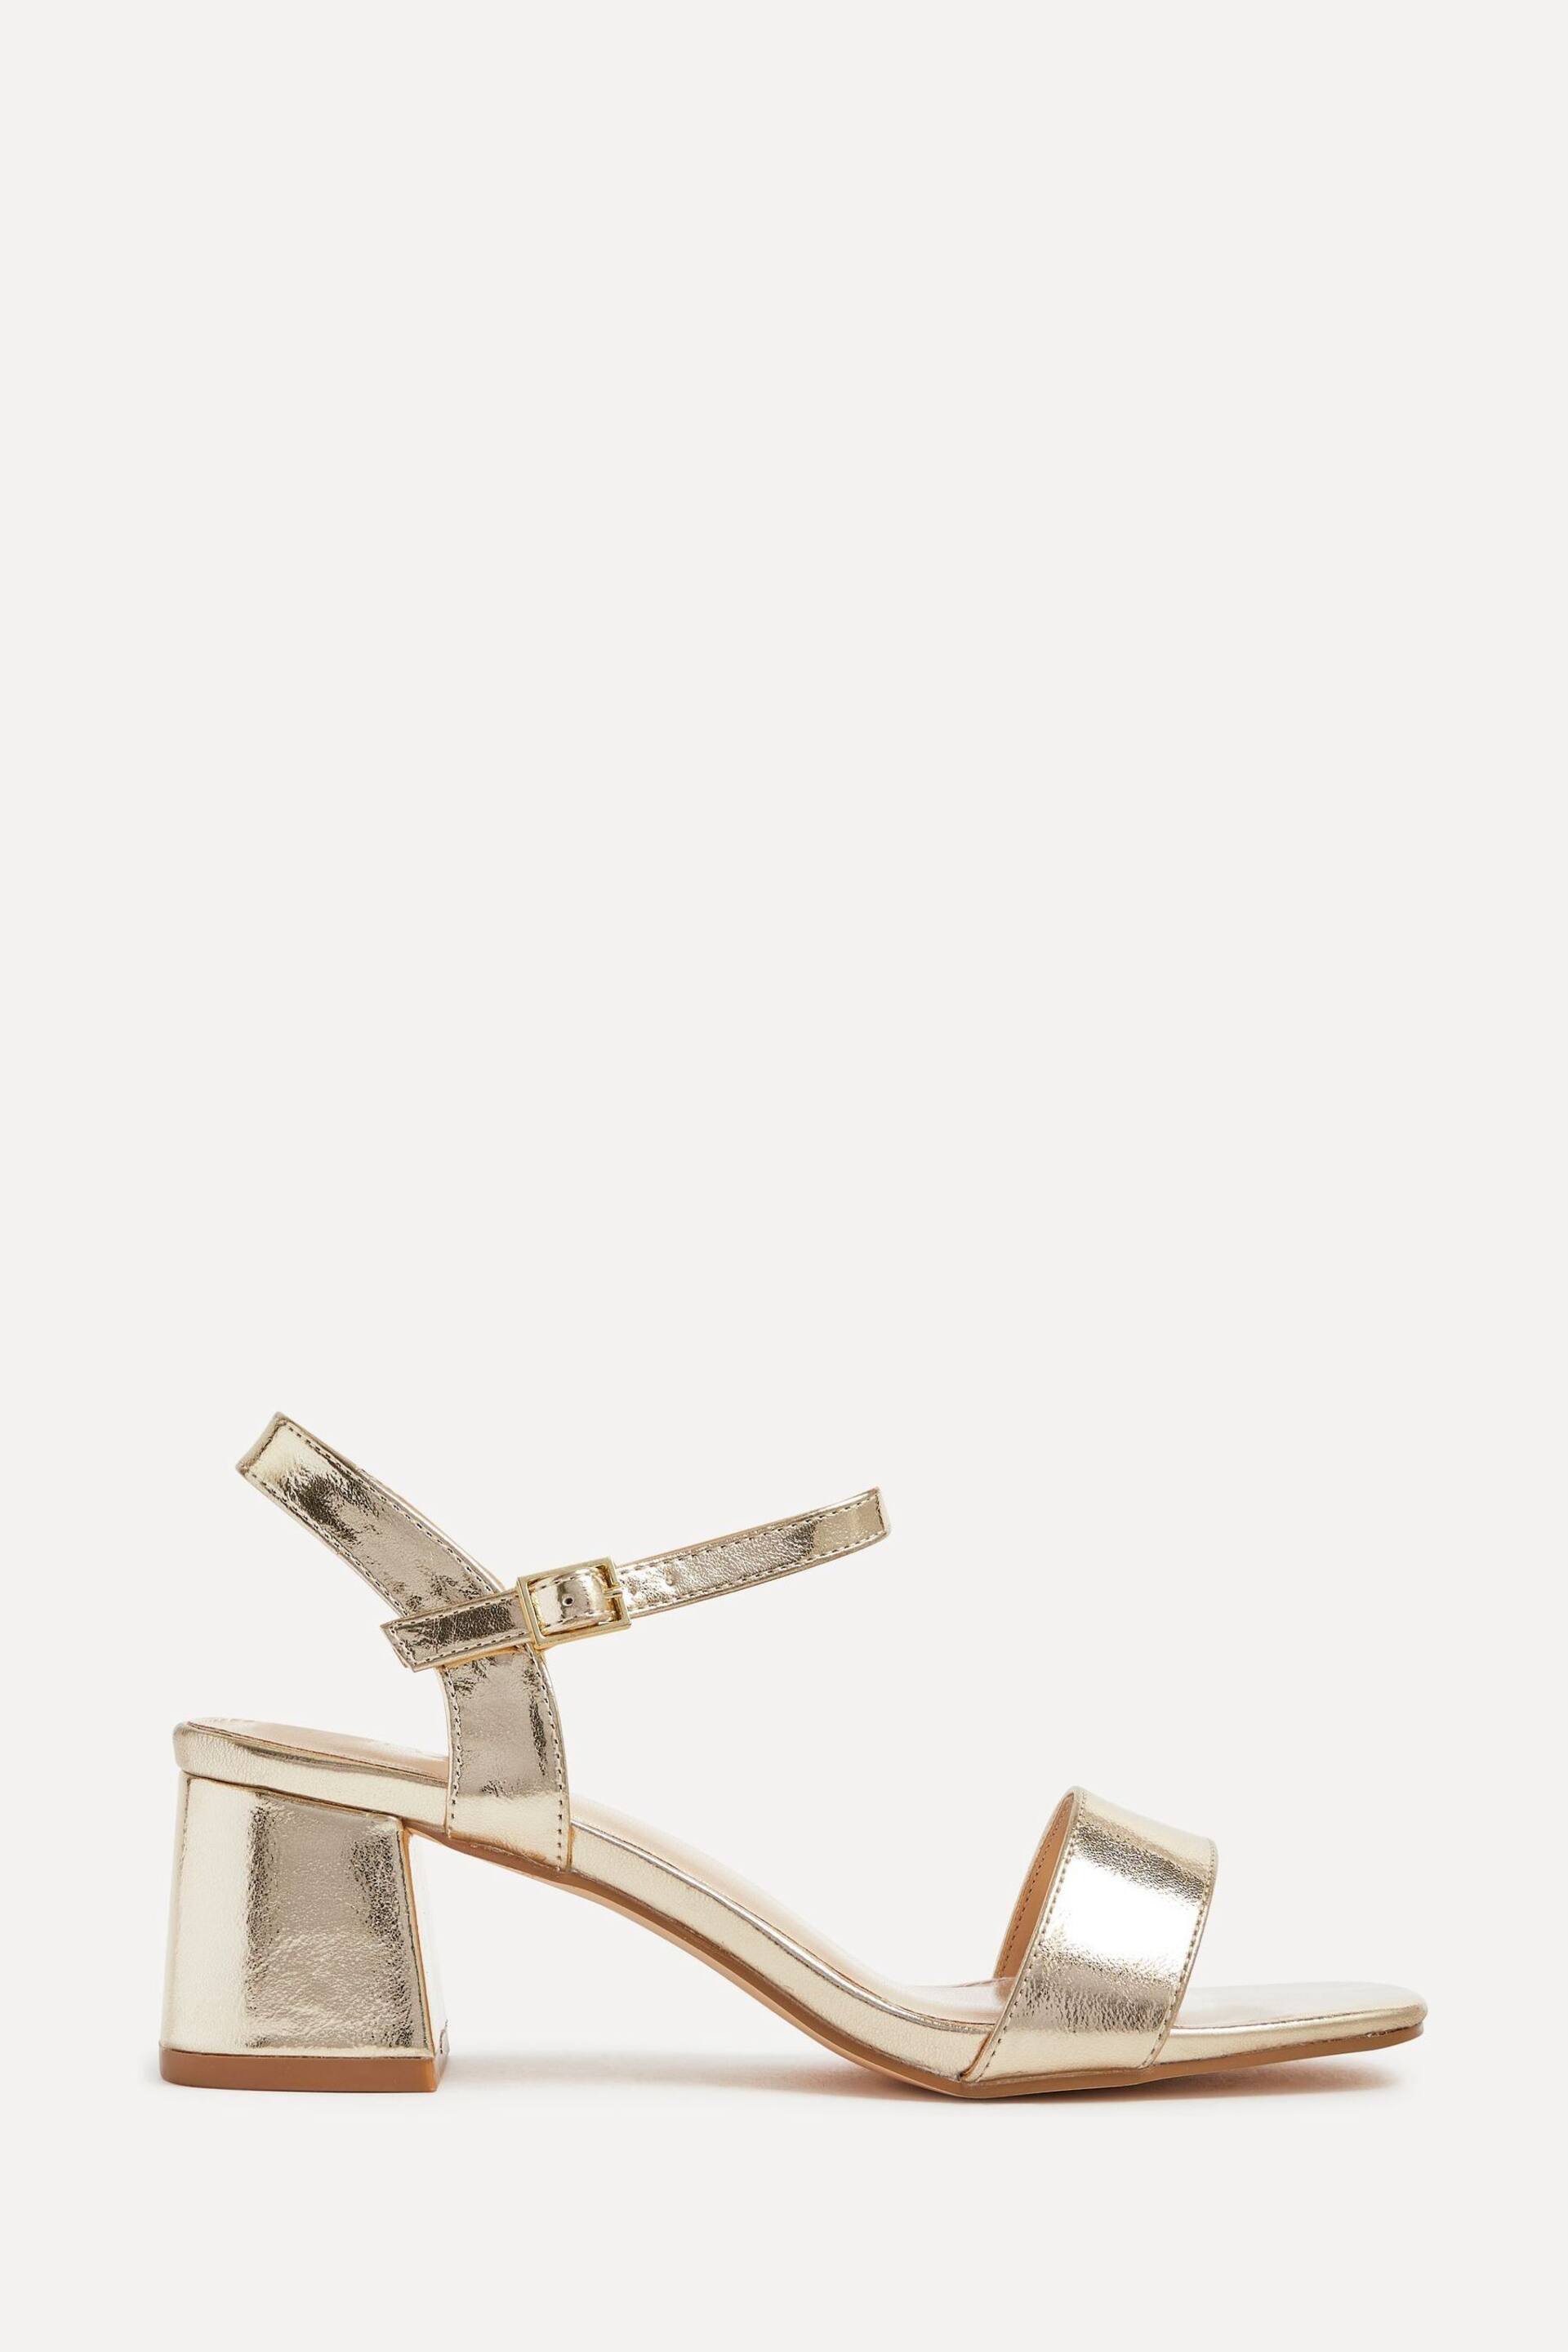 Linzi Gold Darcie Barely There Block Heeled Sandals - Image 2 of 5